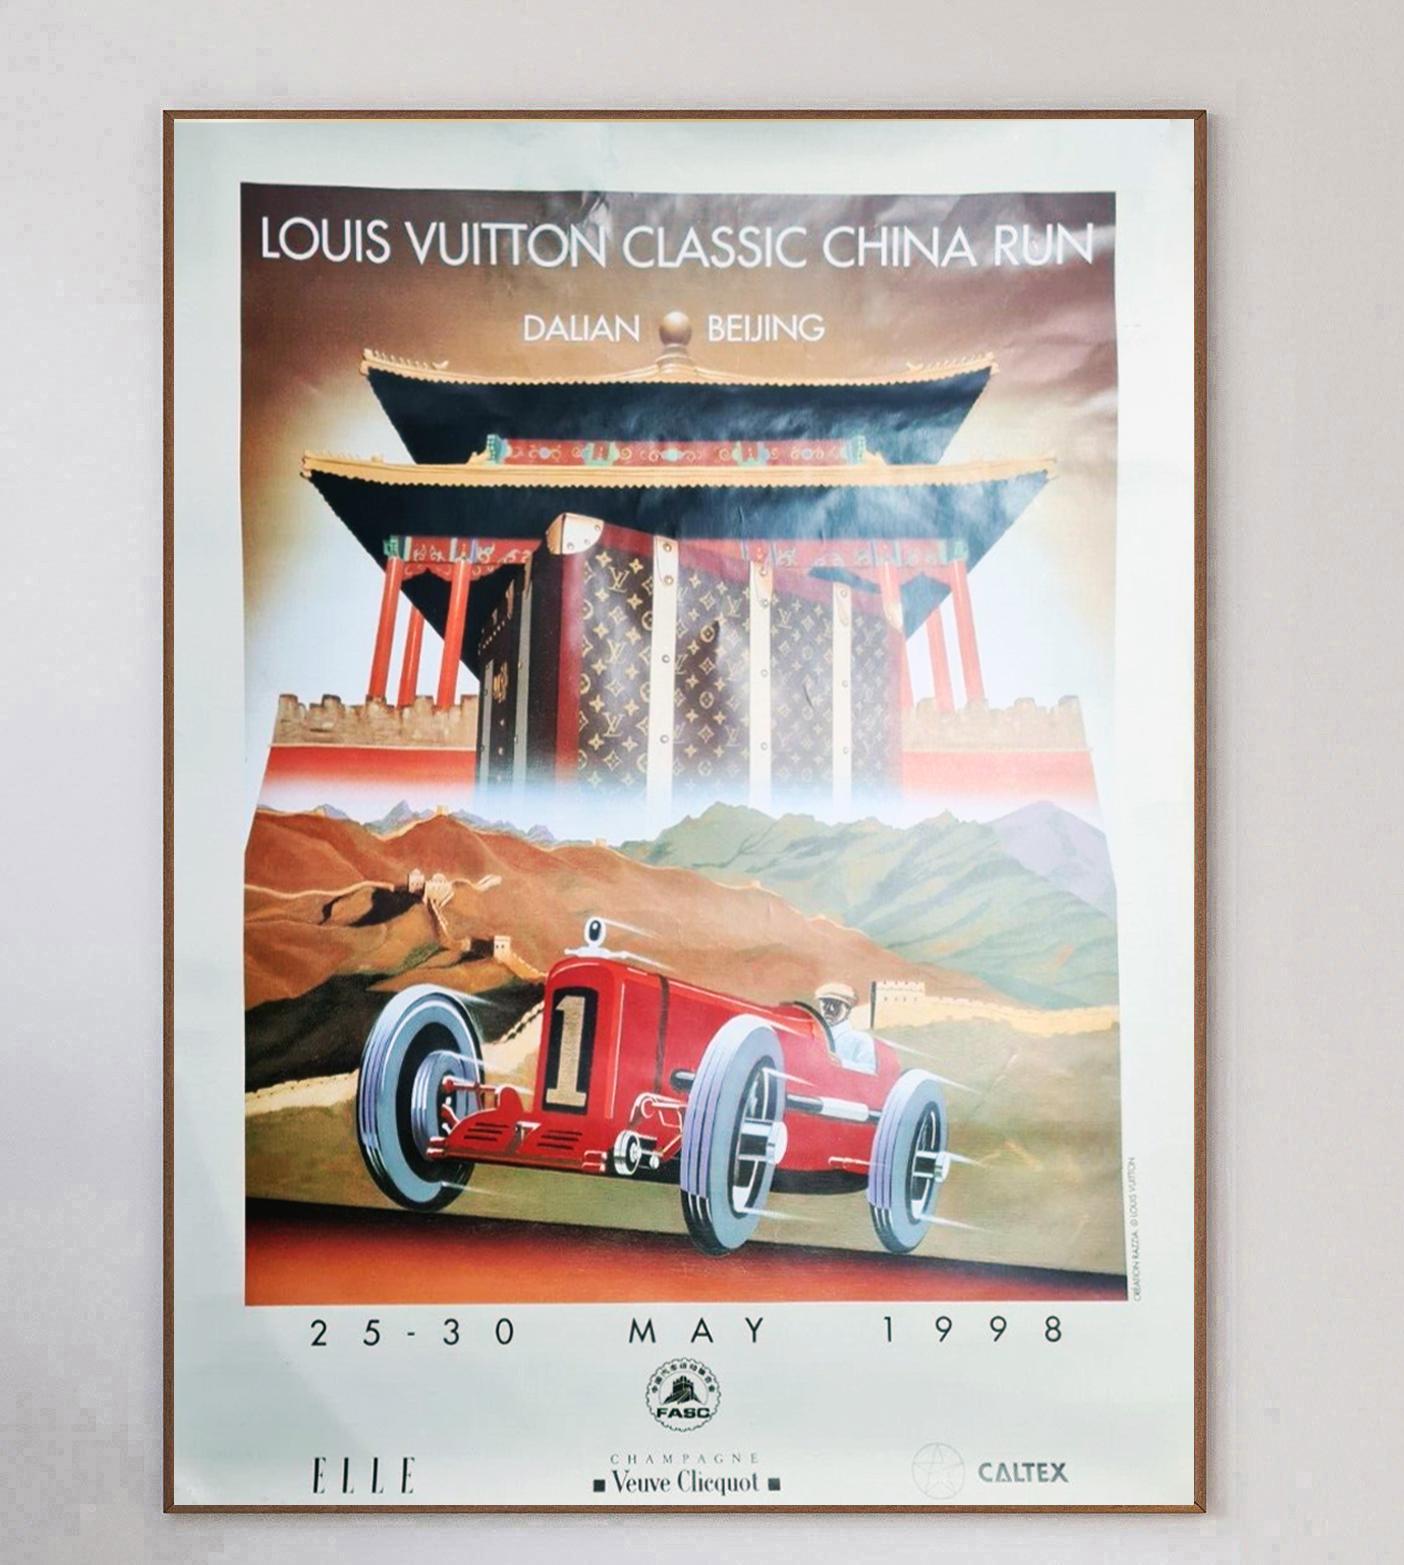 The Louis Vuitton Classic China Run is a vintage car race from Dalian to Beijing and this gorgeous poster depicts a car racing past the Forbidden City in great art deco style. 

Beautifully illustrated by the iconic Razzia during the long